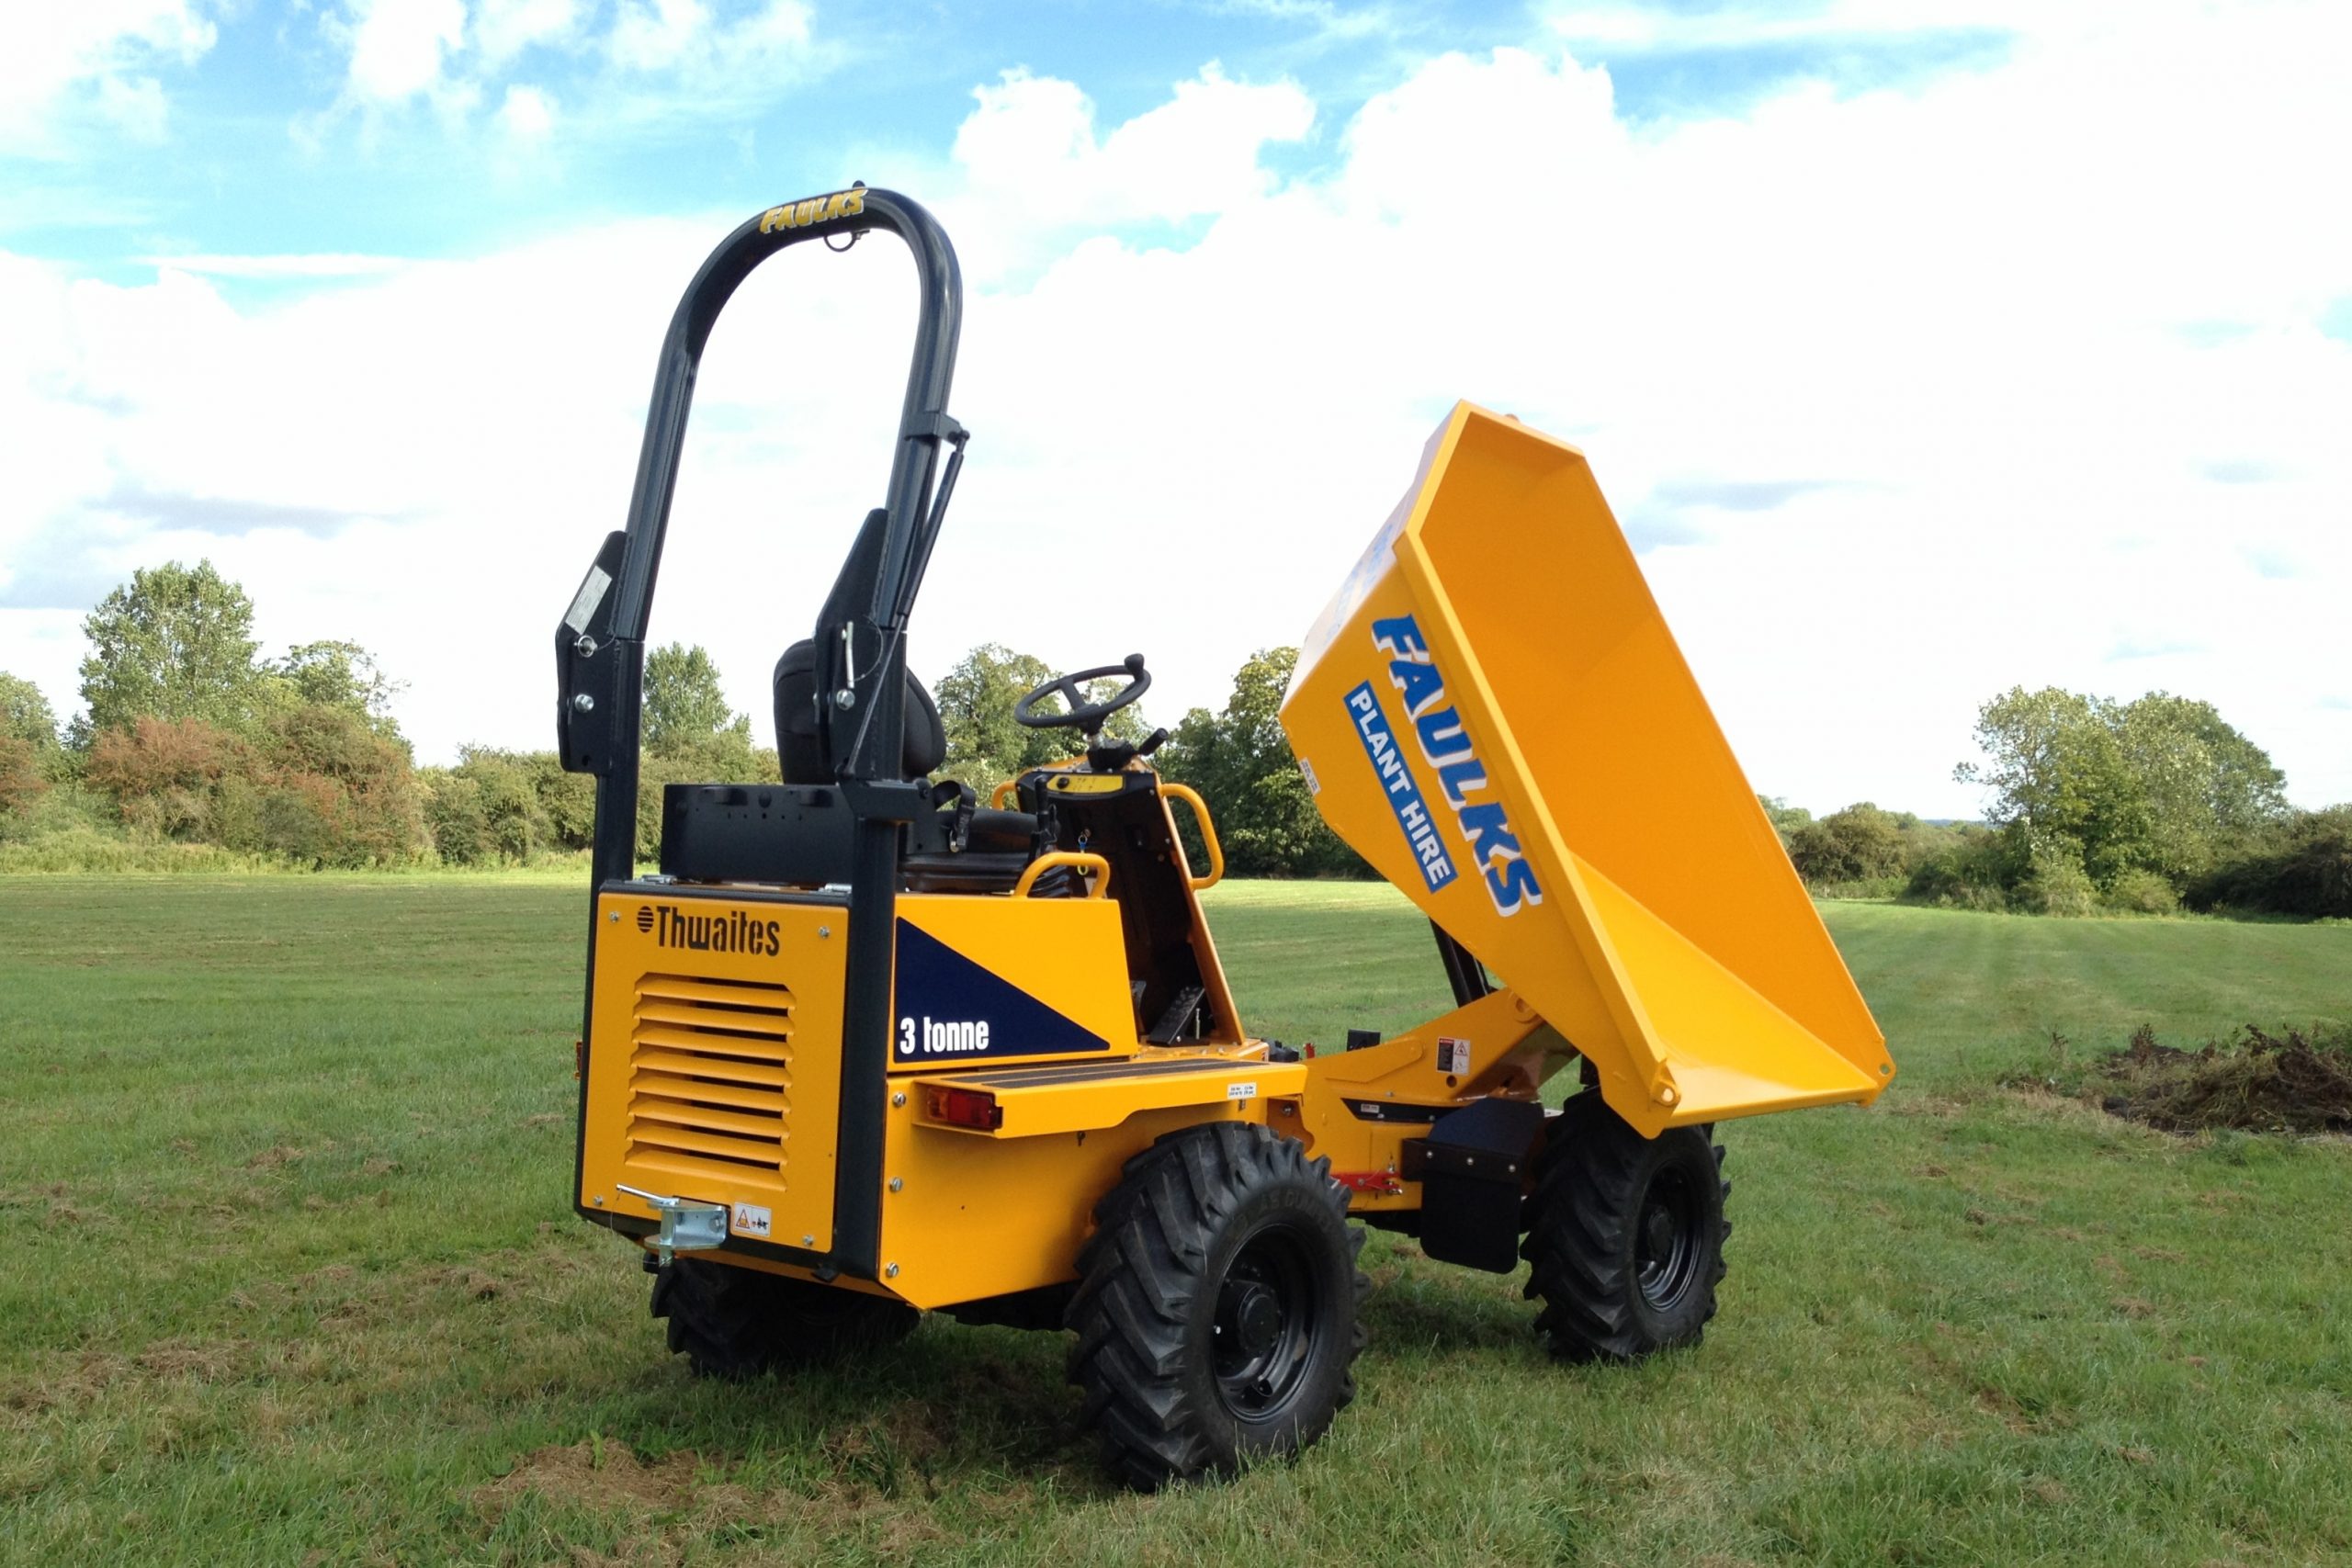 Small thwaites 3 tonne dumper in field with loader raised in topping position